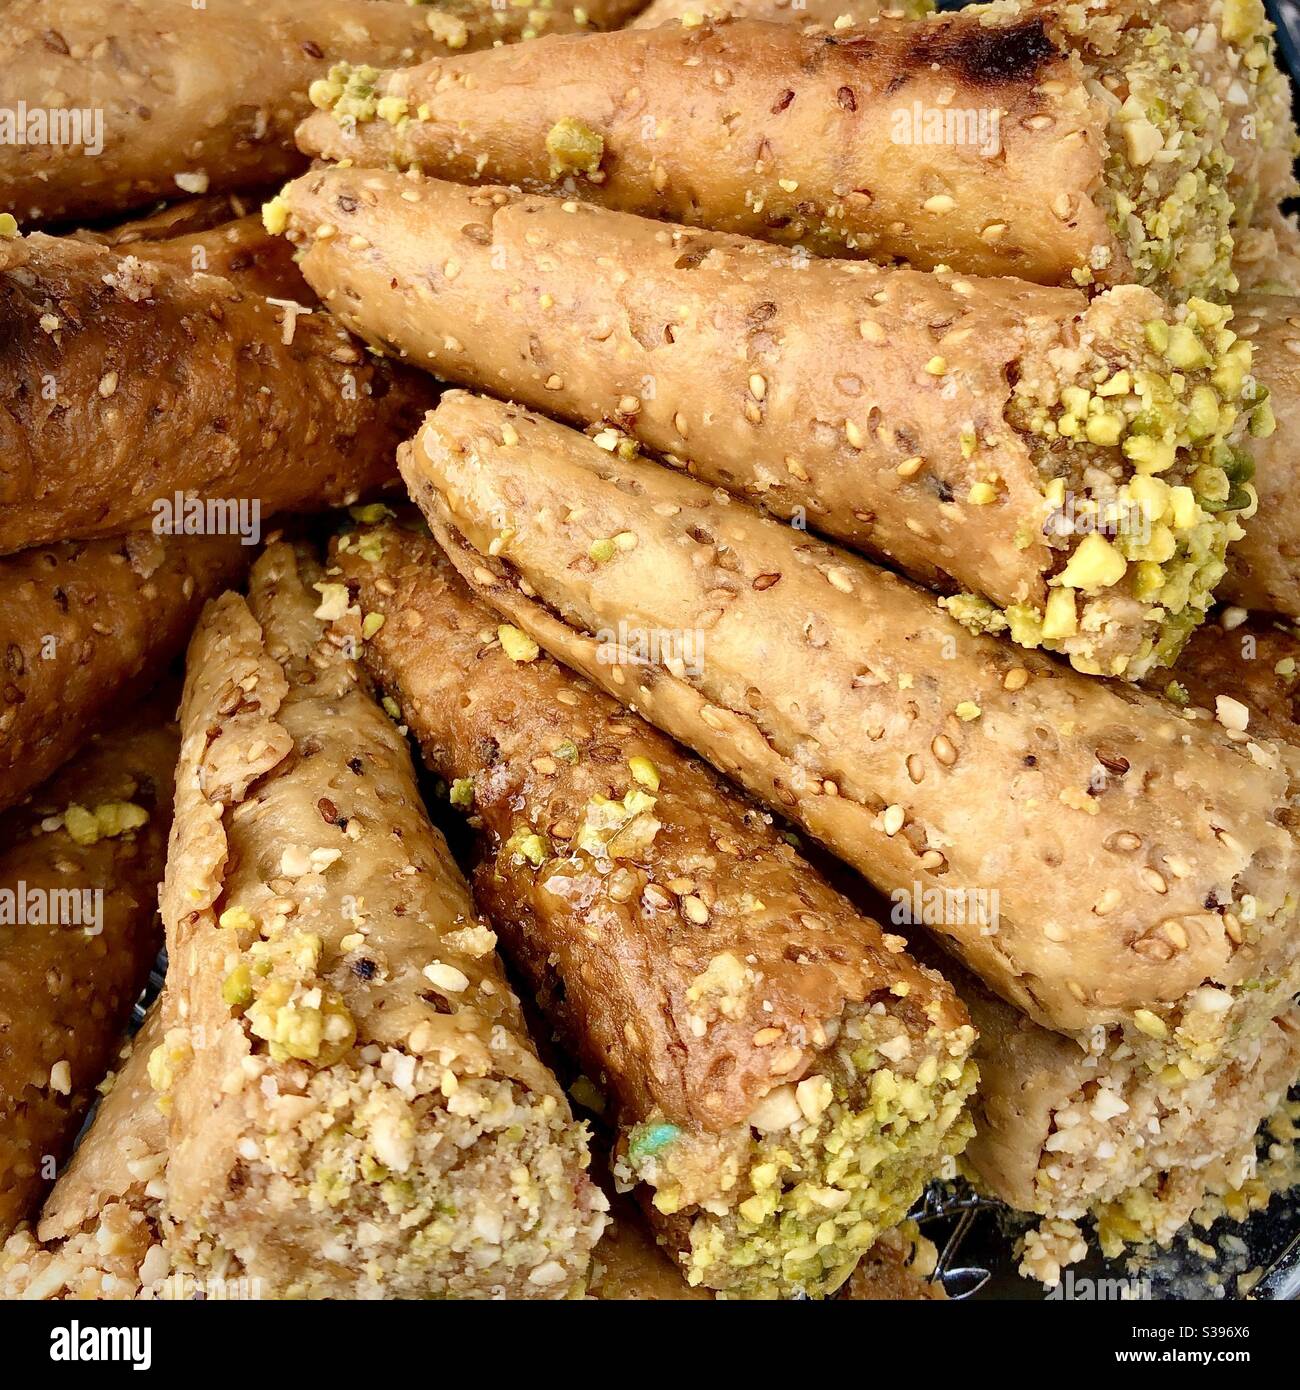 Display of oriental baklava cakes at Arab market in Châtellerault, Vienne (86), France. Stock Photo